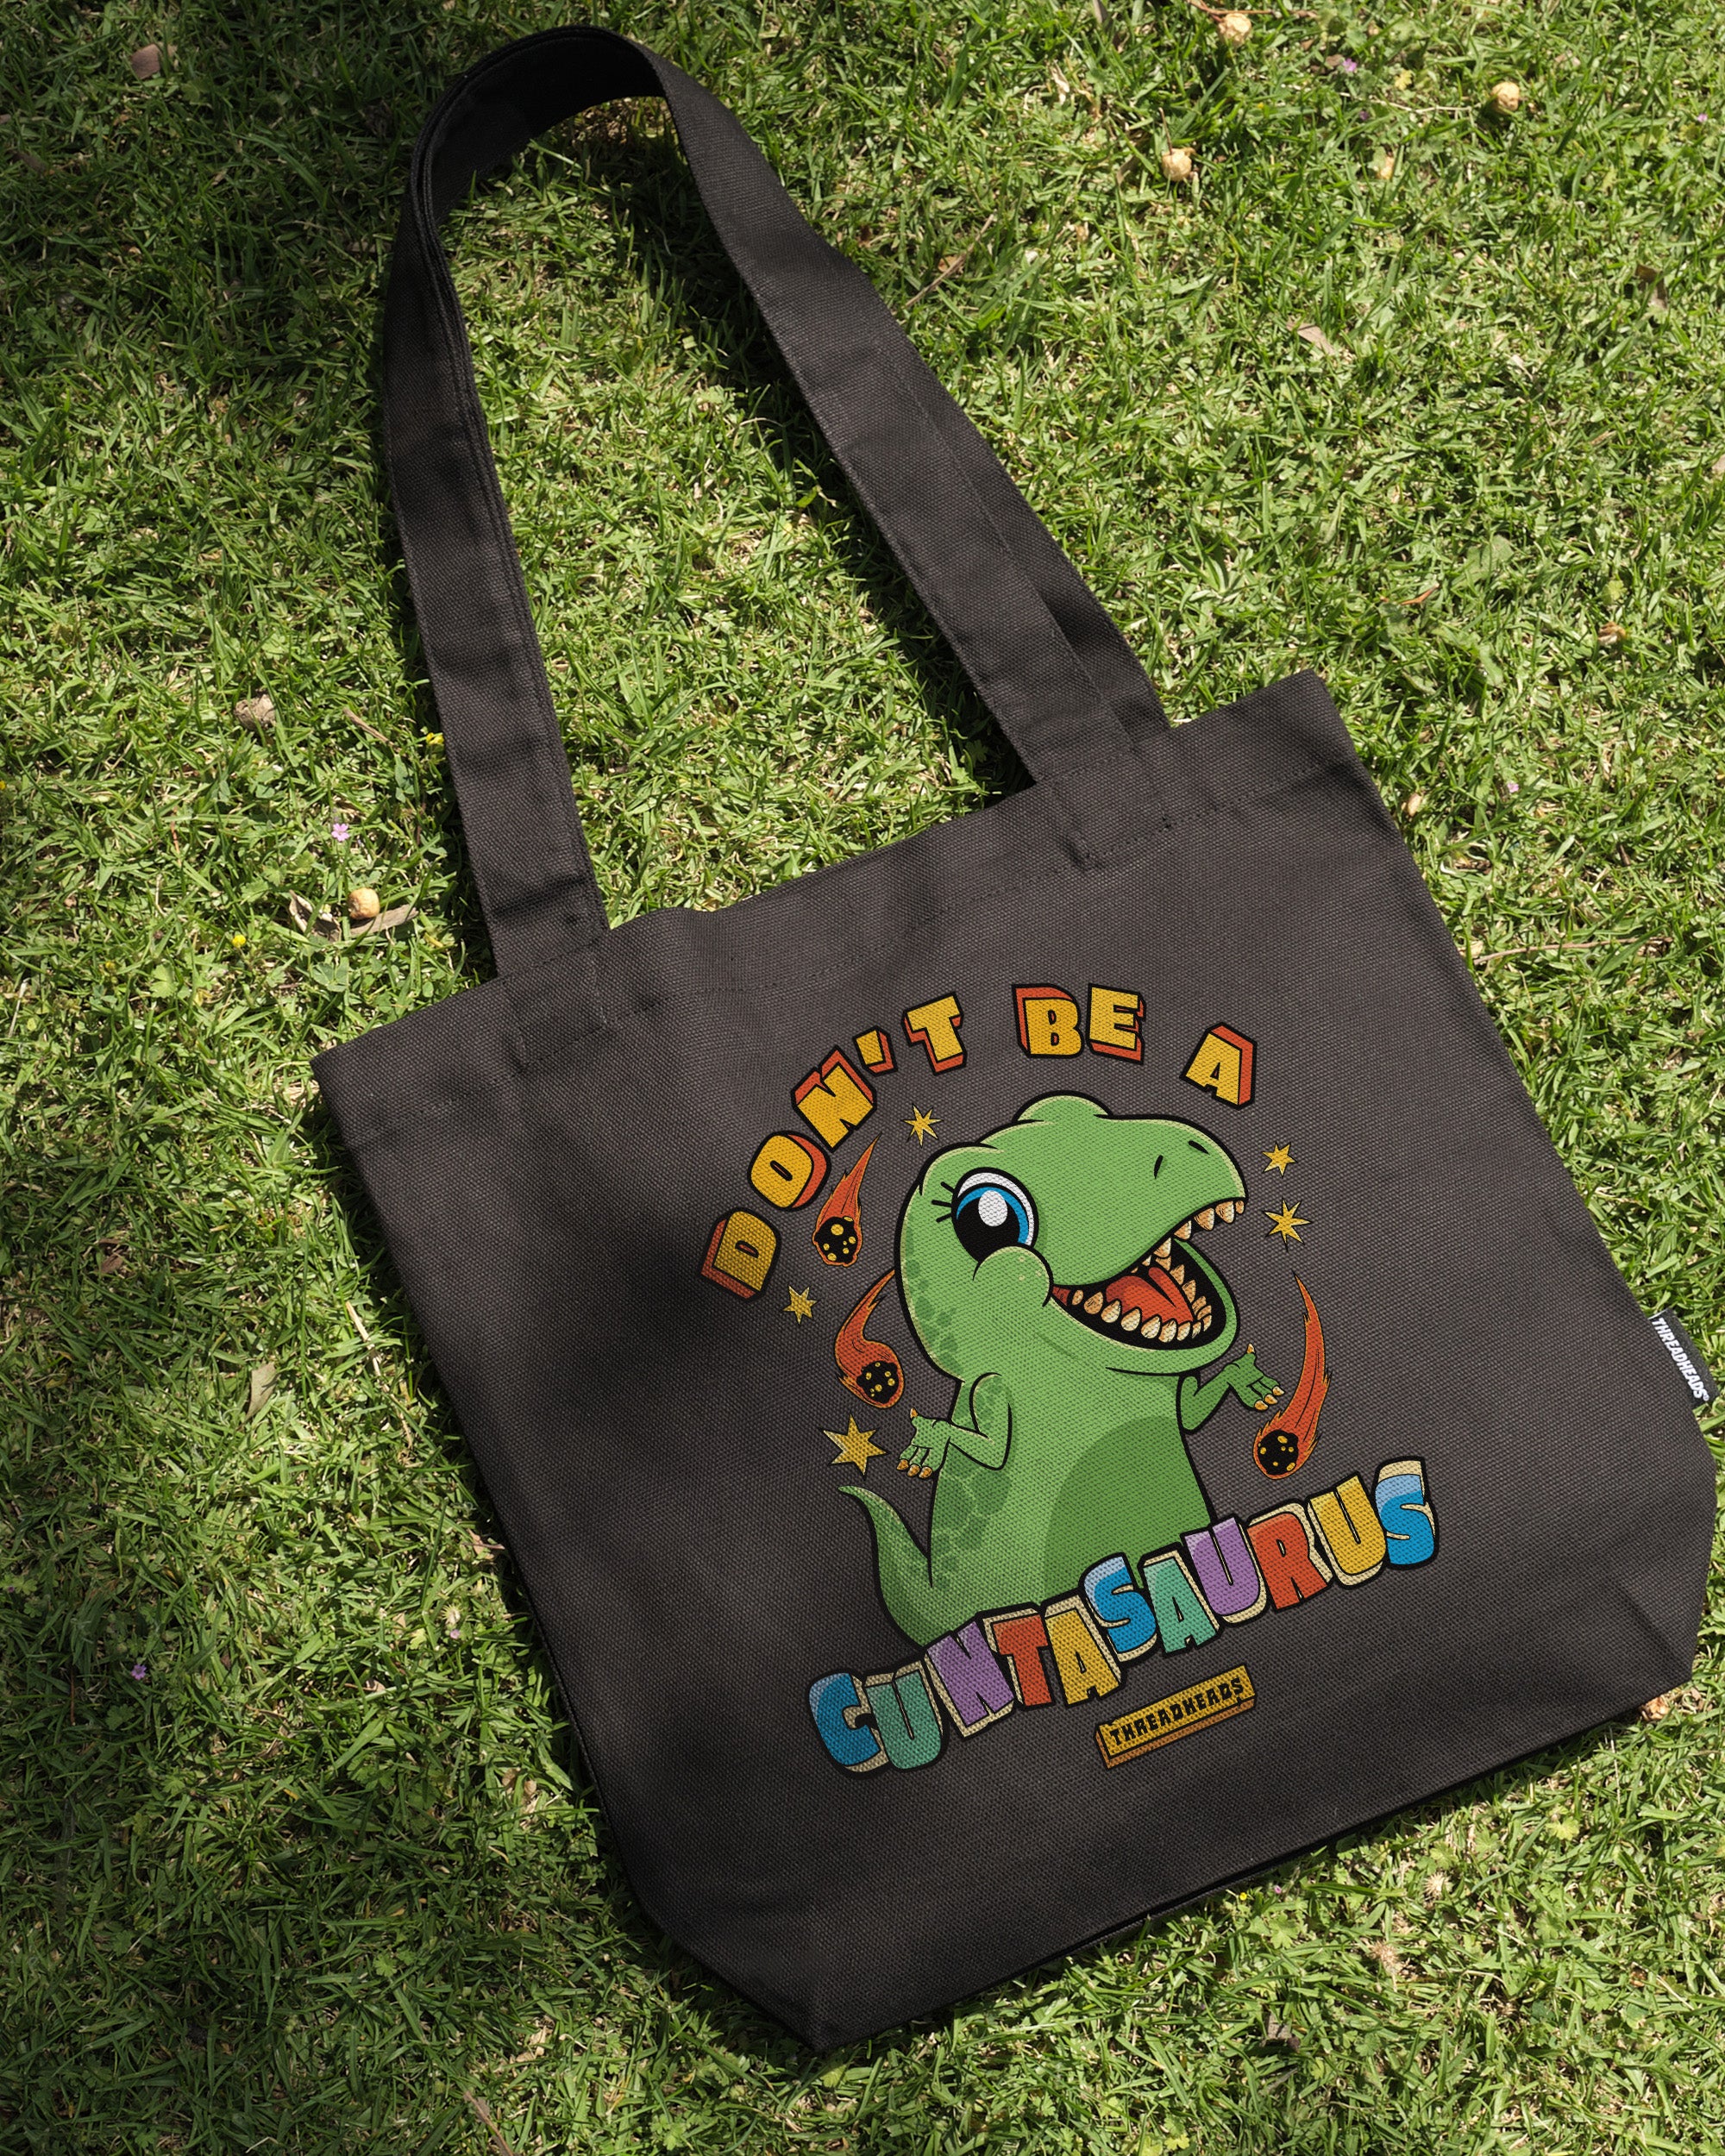 Don't Be a Cuntasaurus Tote Bag